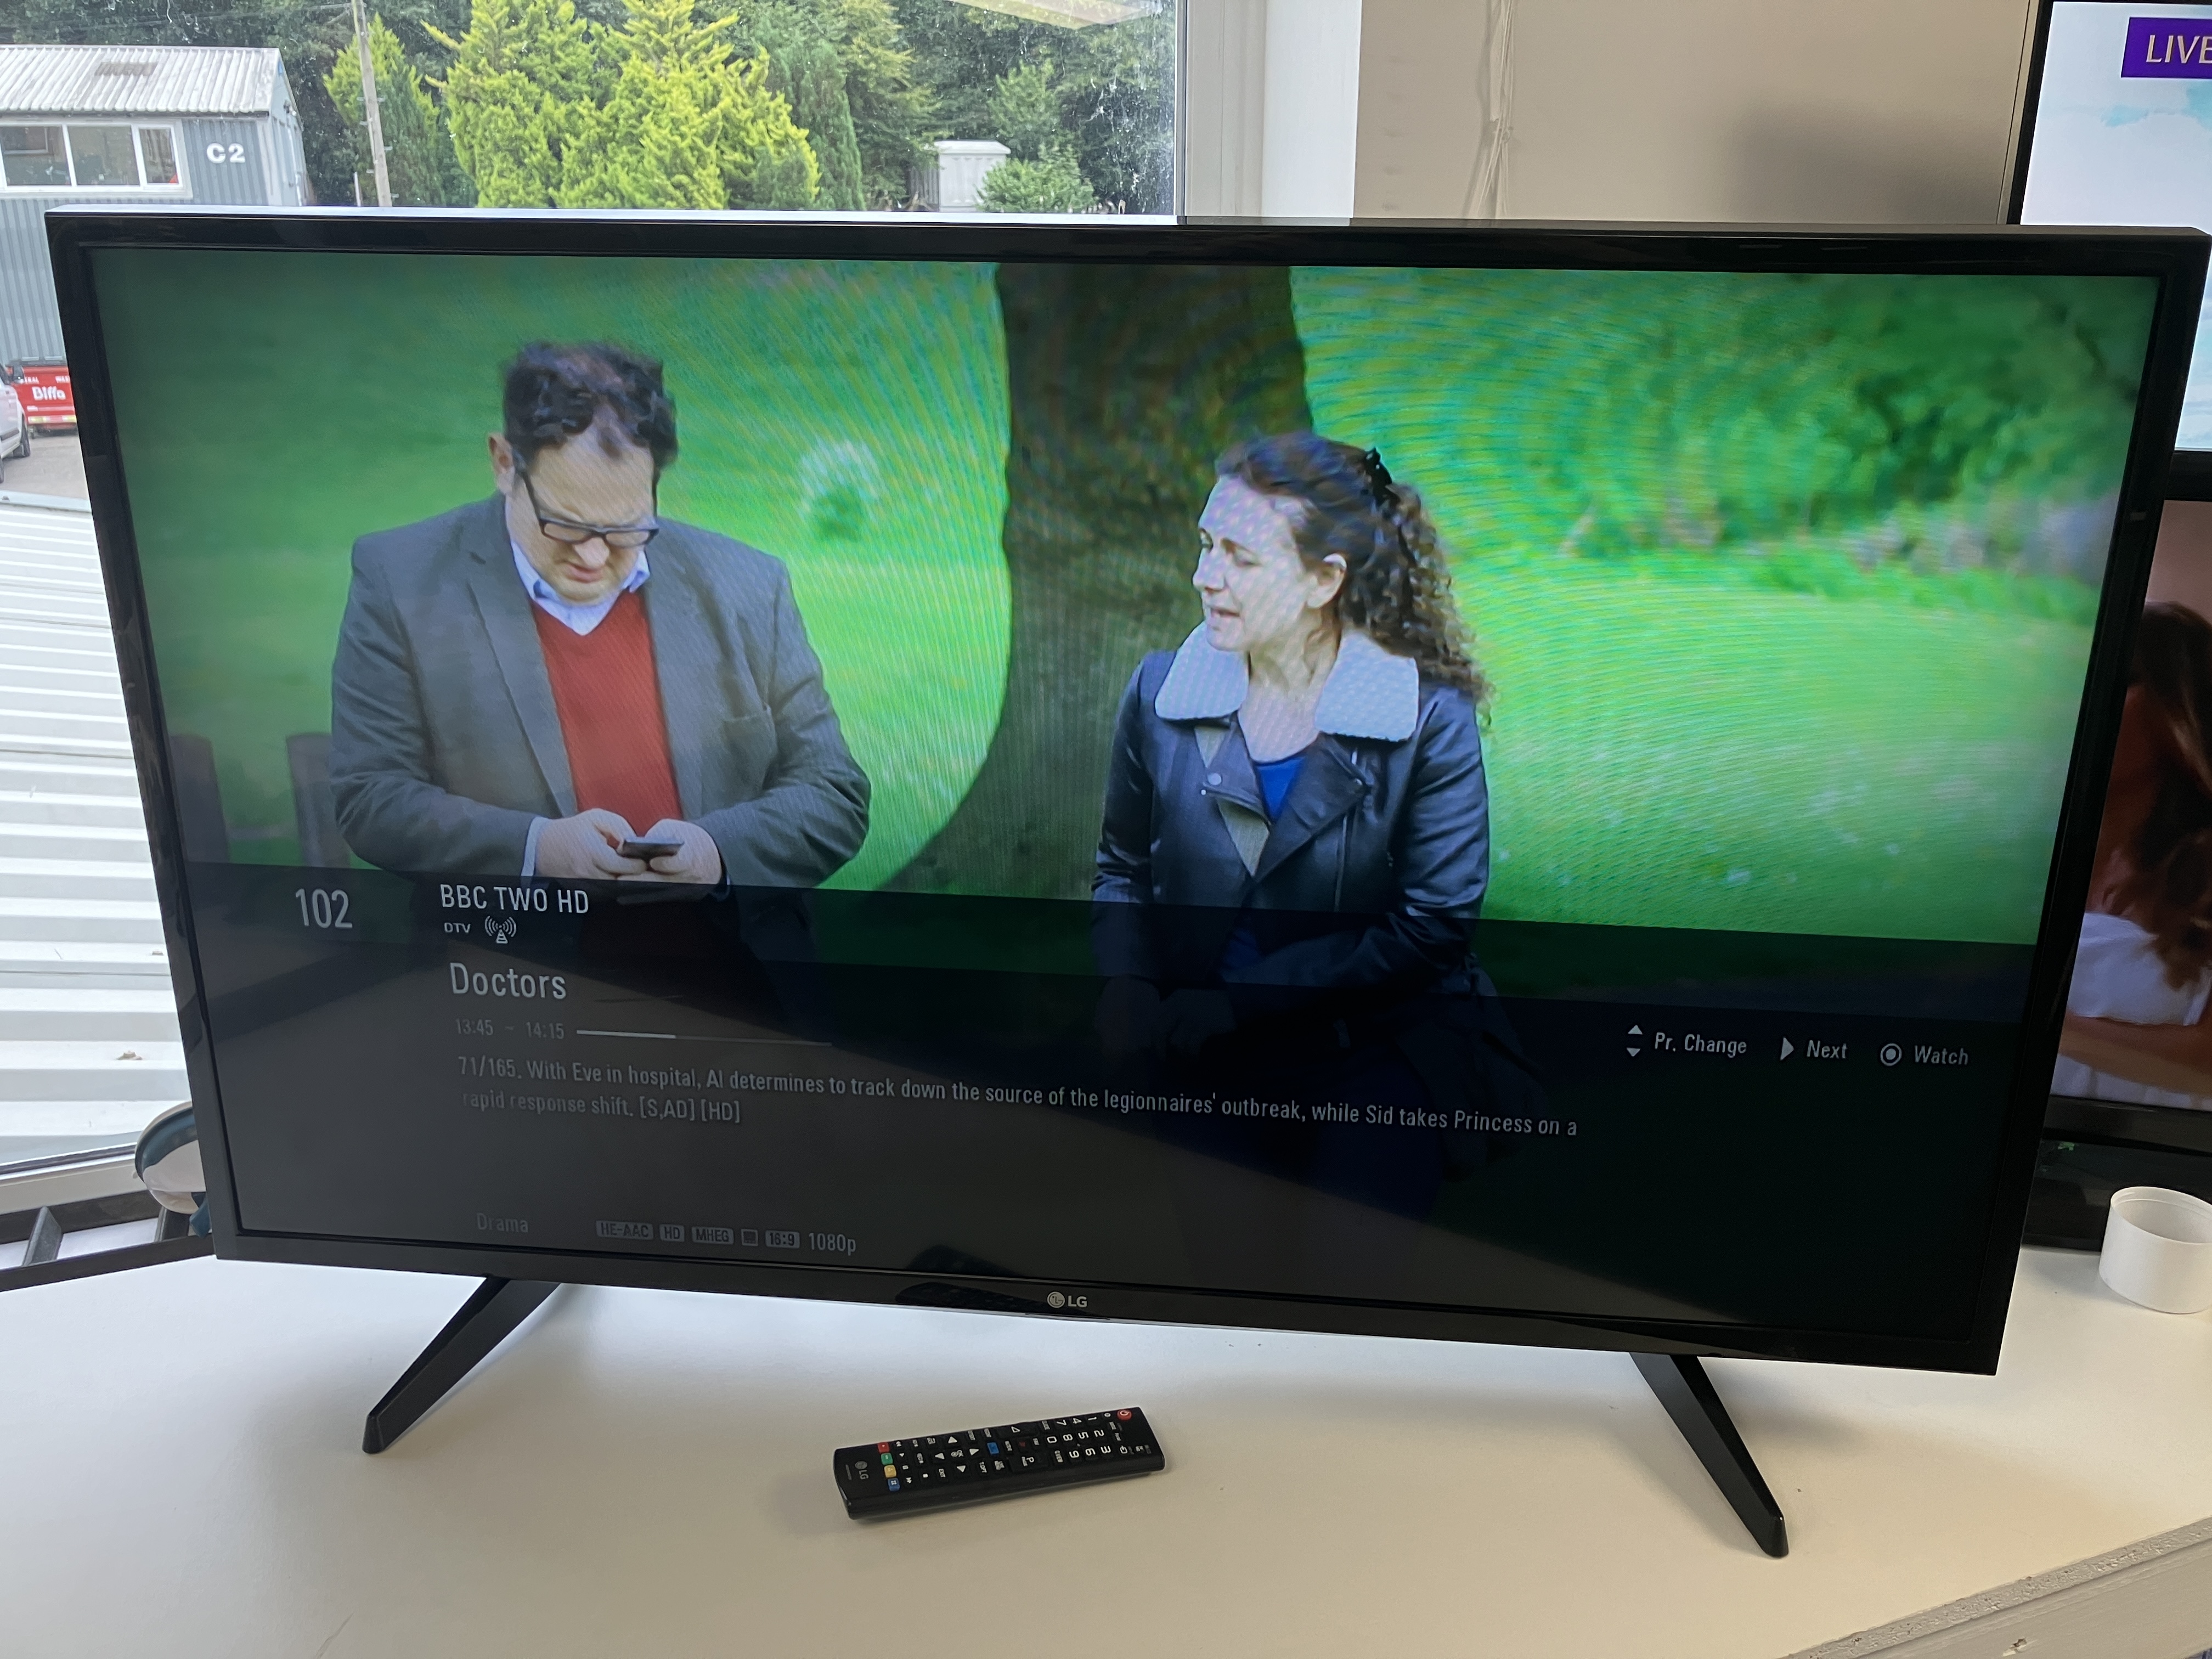 43in LG 43LJ515V, LED freeview HD, Non-smart TV